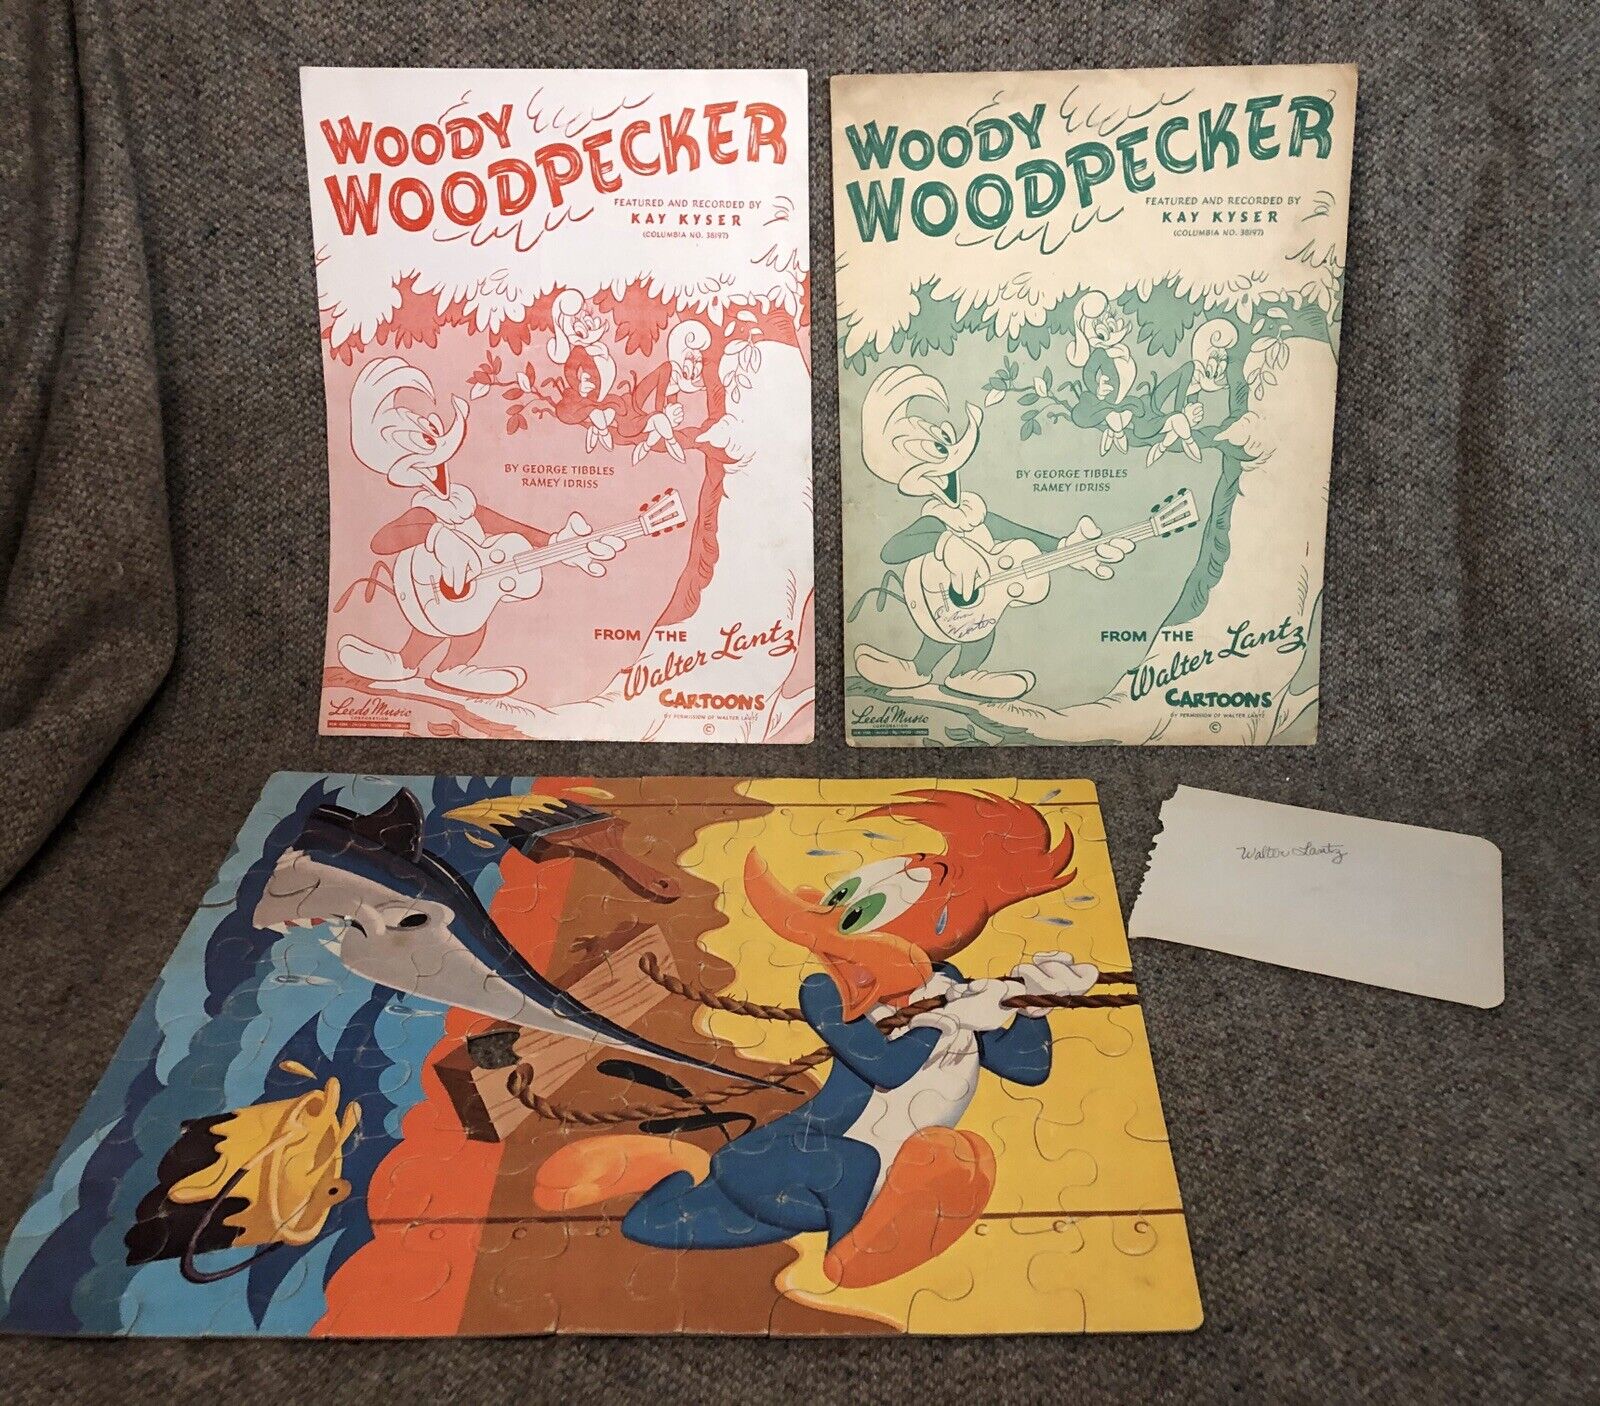 VINTAGE WOODY WOODPECKER COLLECTION WALTER LANTZ AUTOGRAPH PUZZLE SHEET MUSIC